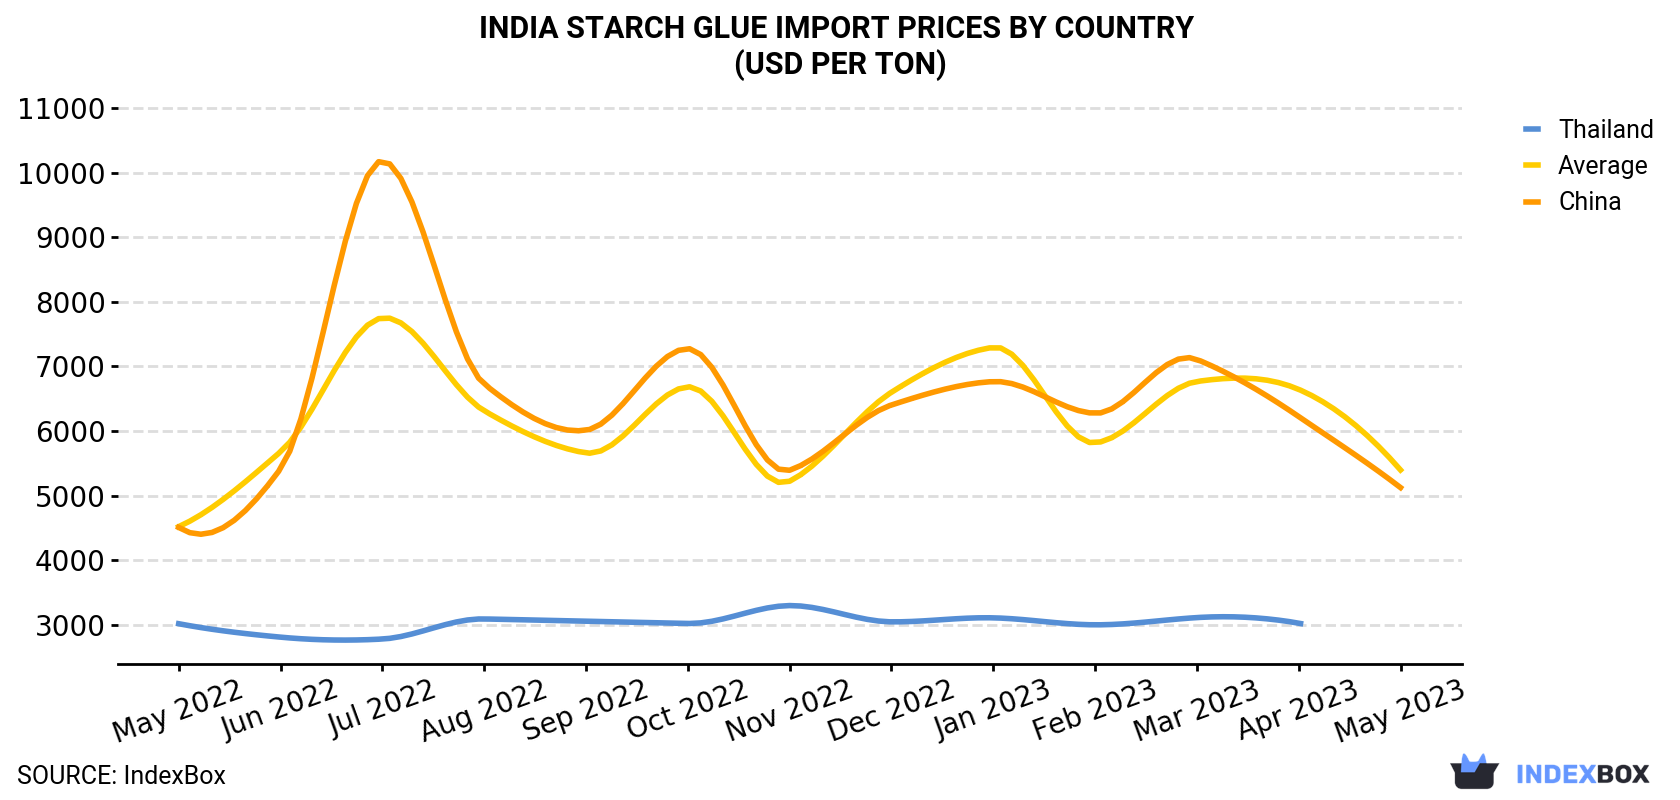 India Starch Glue Import Prices By Country (USD Per Ton)